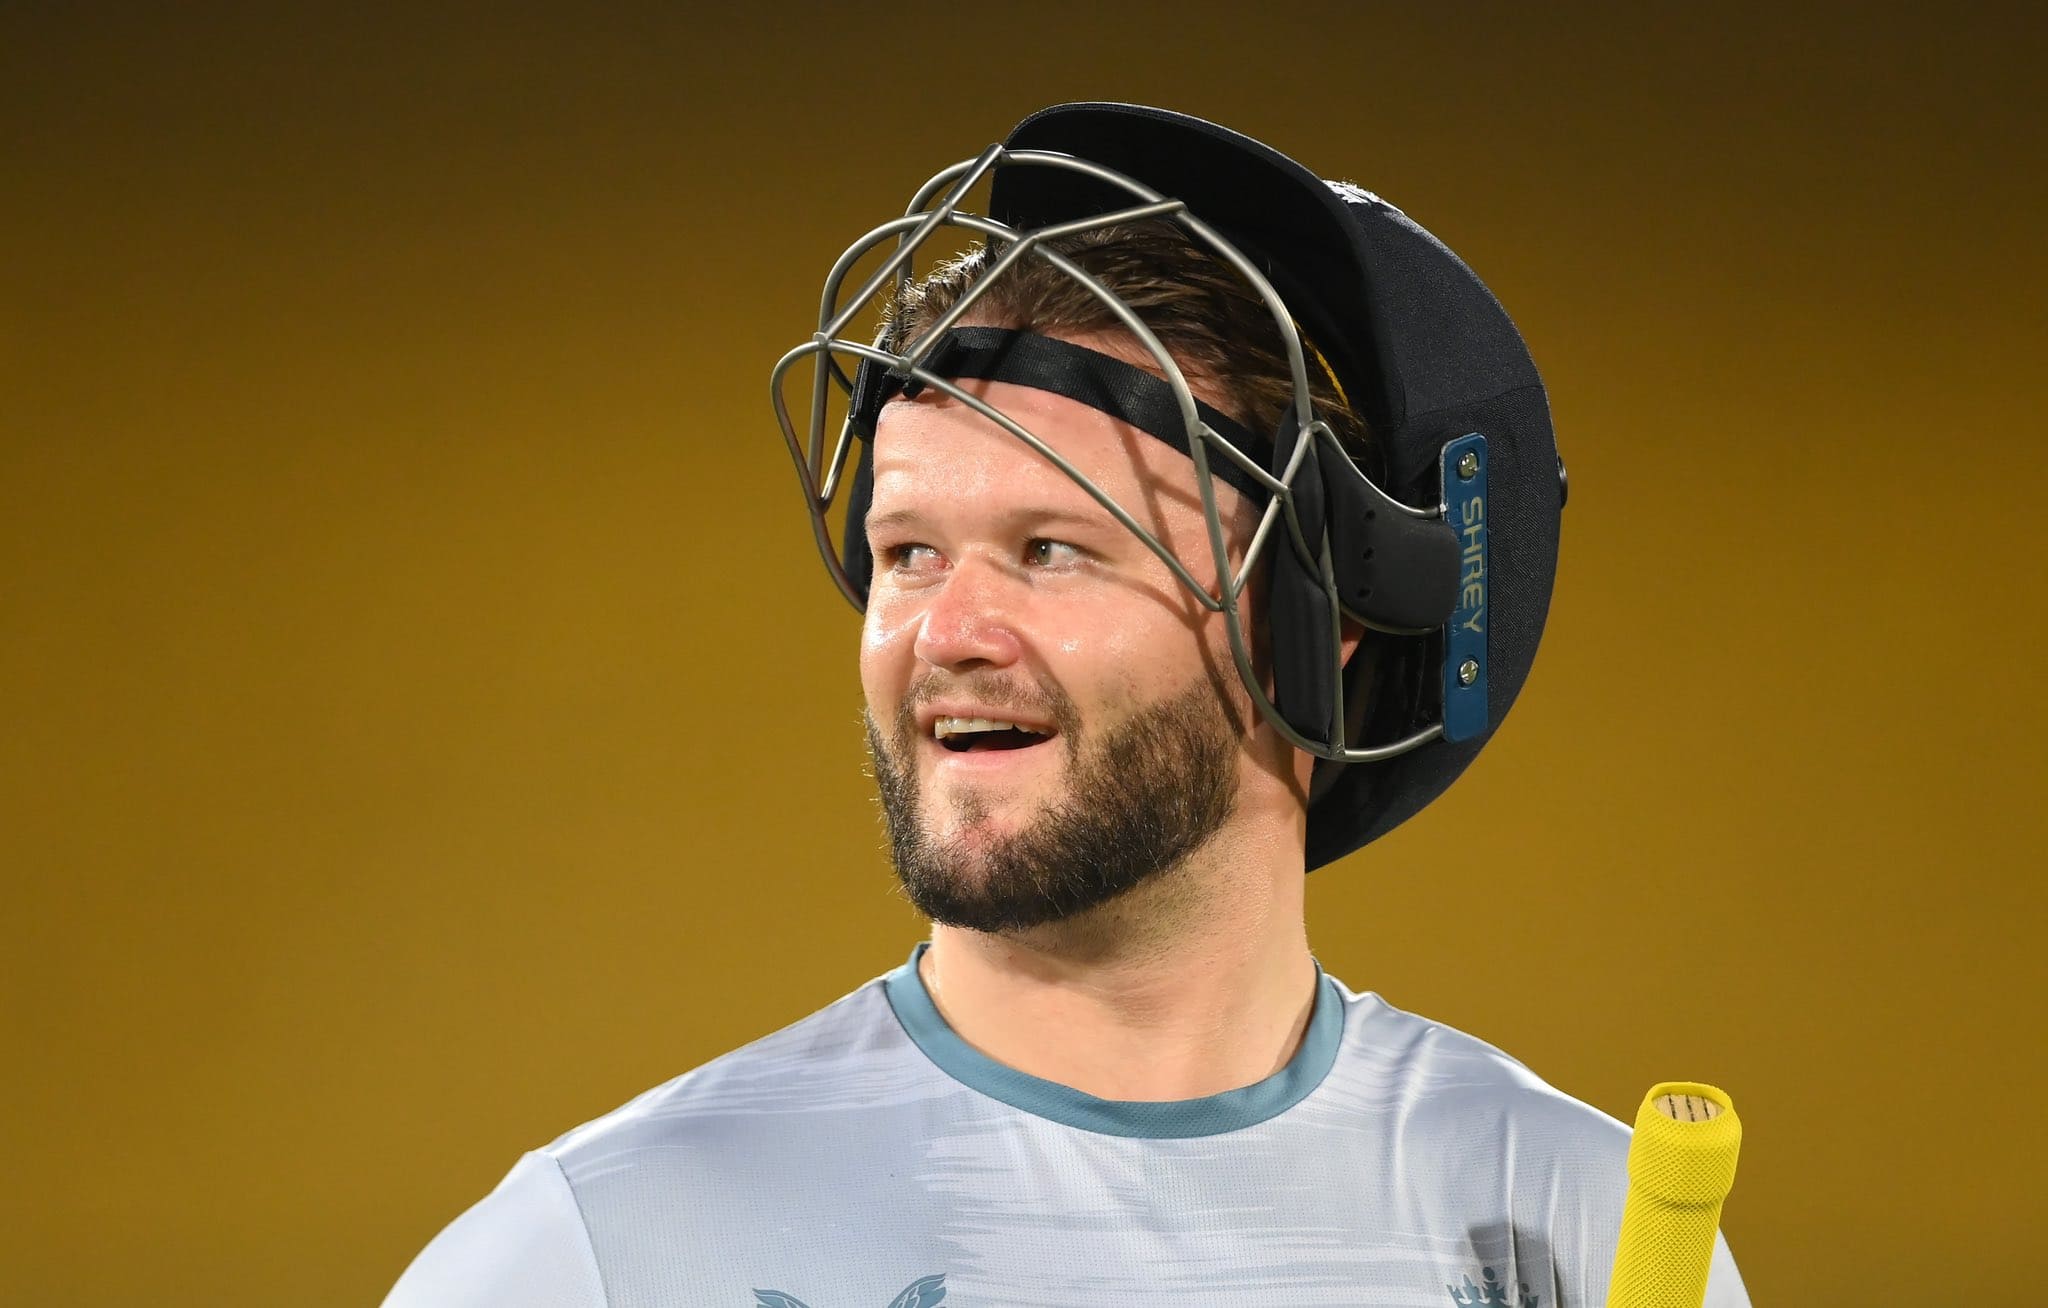 Thinking of Playing in The Ashes 2023 Gives Me Shivers: Ben Duckett